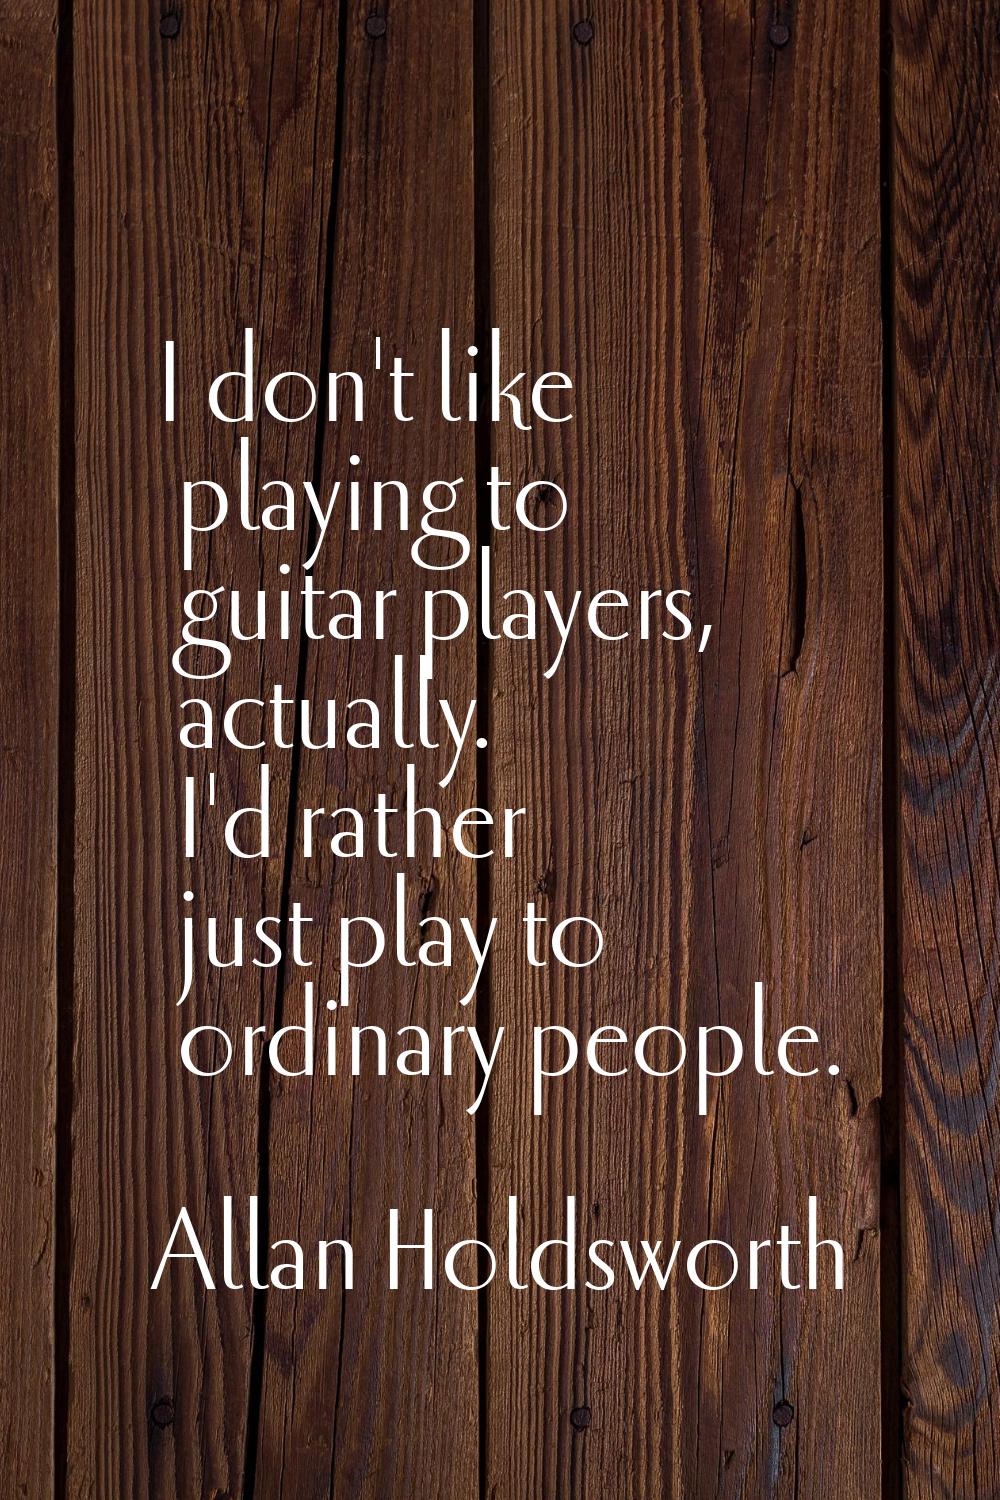 I don't like playing to guitar players, actually. I'd rather just play to ordinary people.